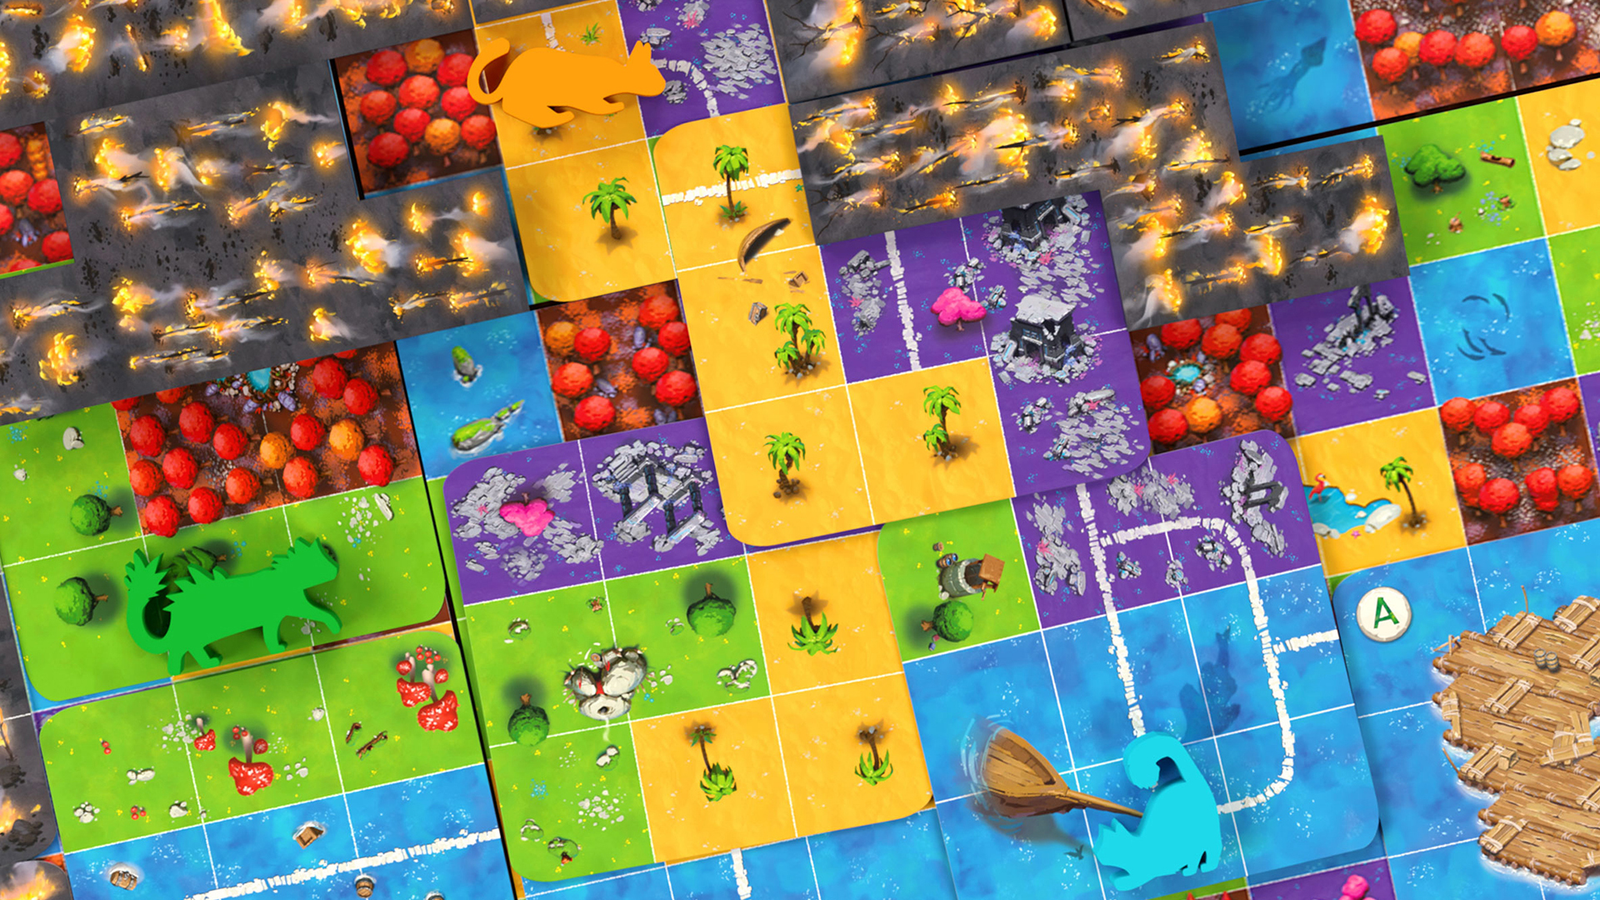 Isle of Cats board game sequel teams up players to rescue kitties